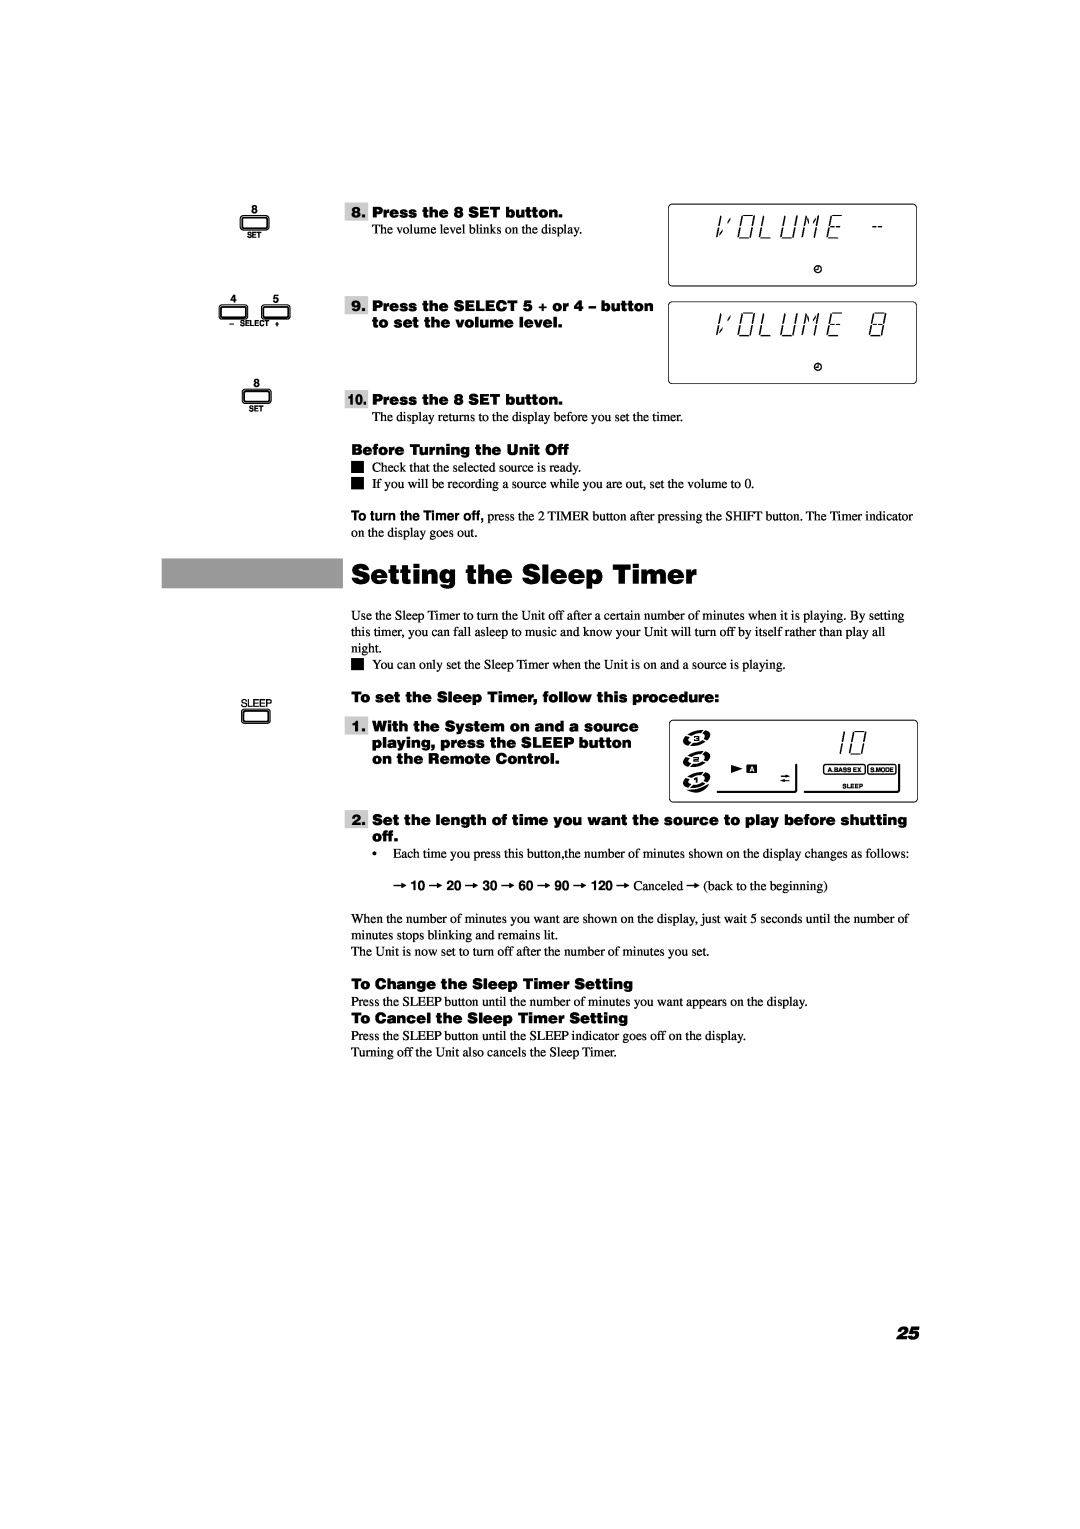 JVC SP-D302 manual Setting the Sleep Timer, Press the 8 SET button, Before Turning the Unit Off 